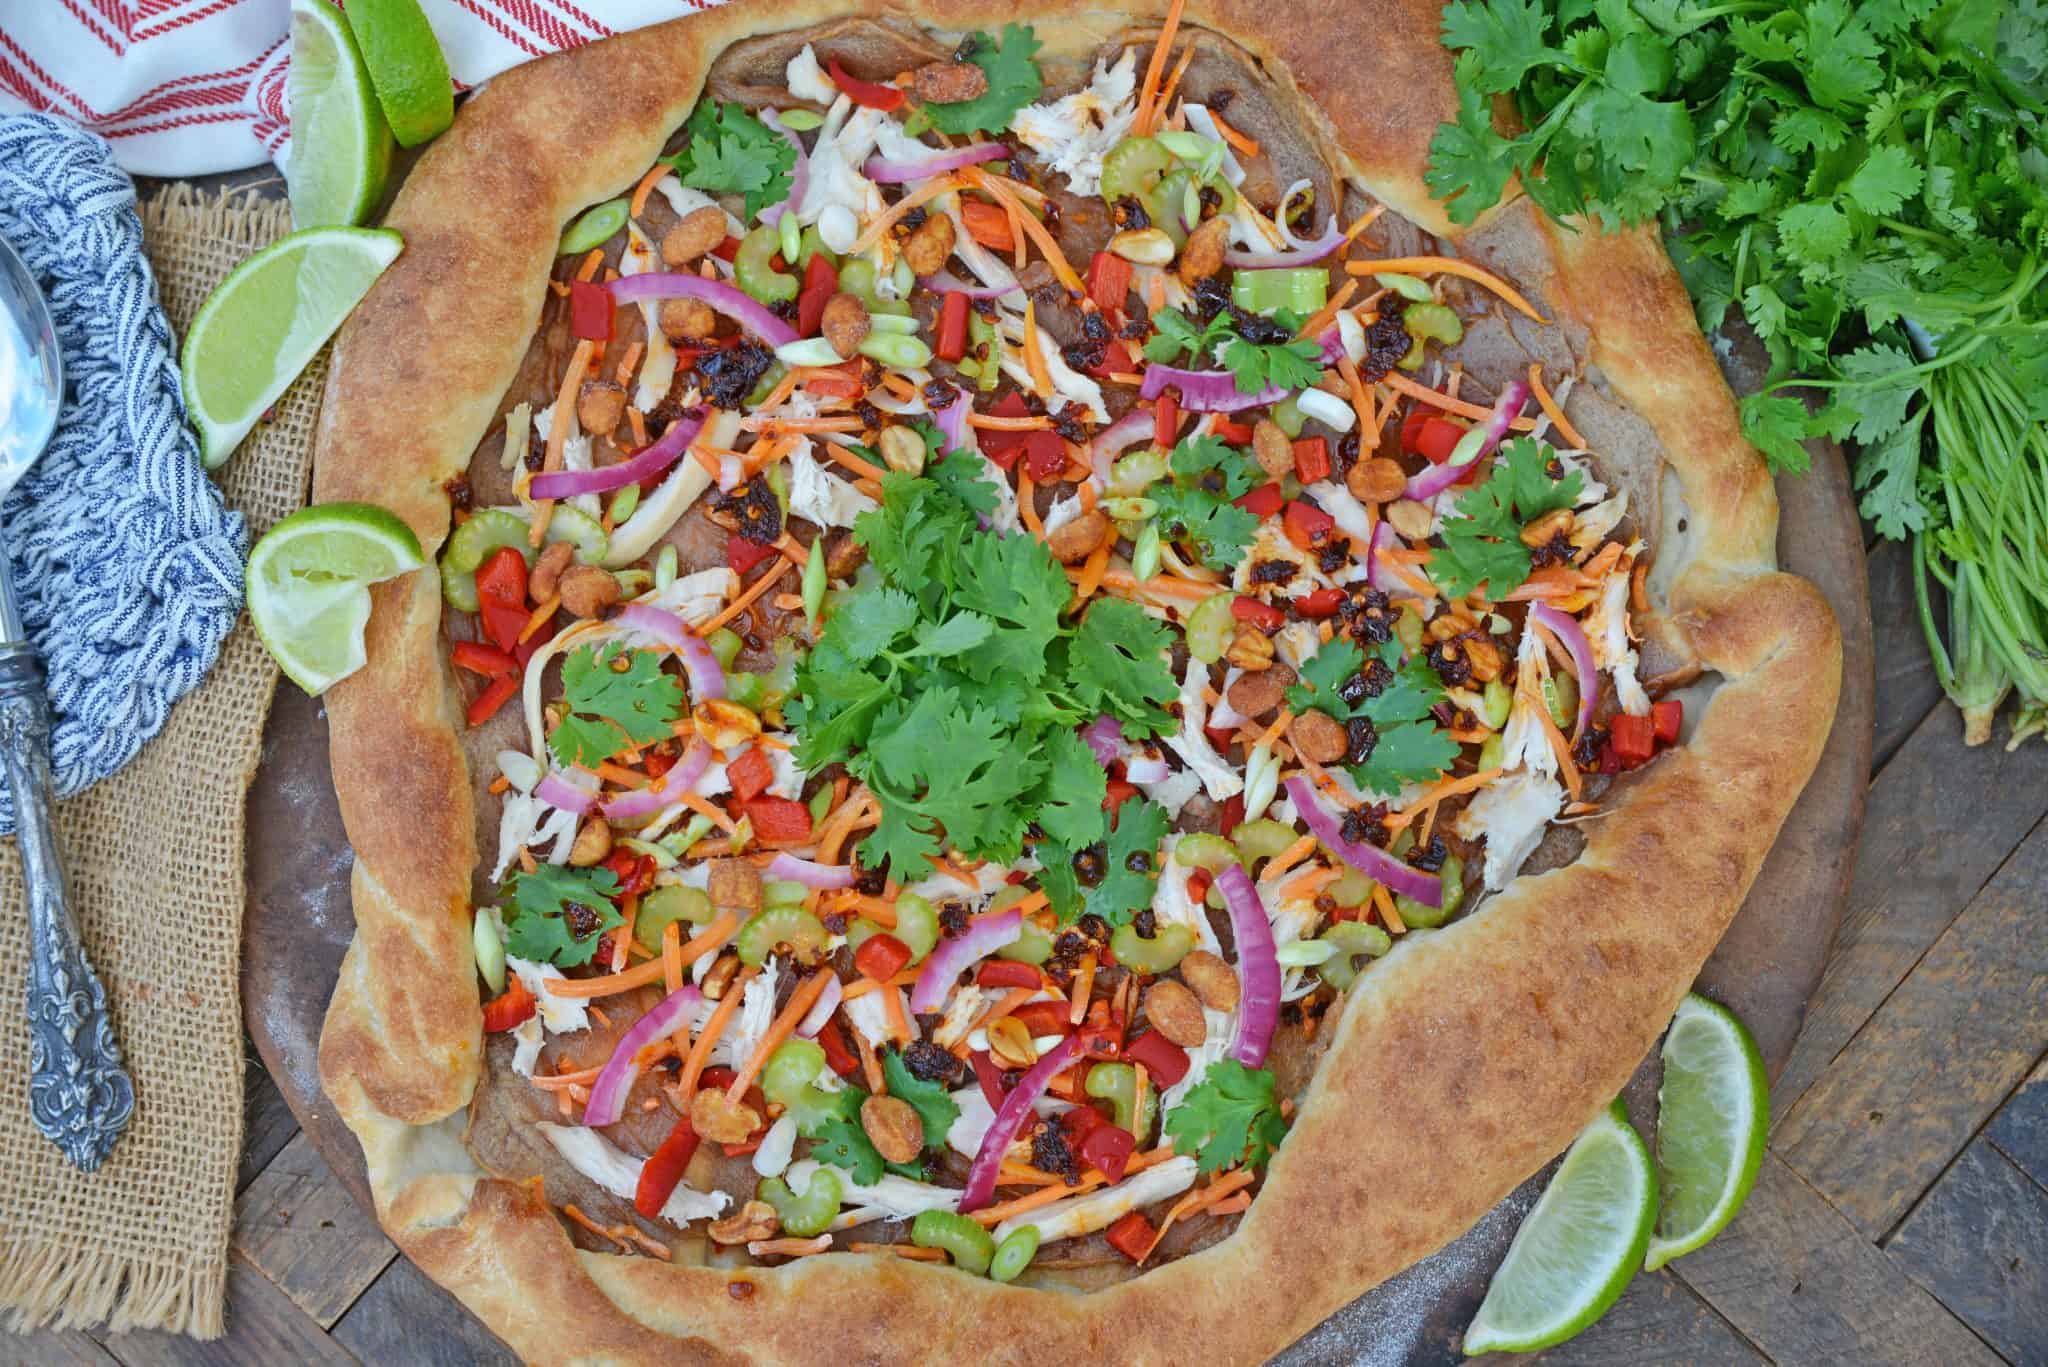 Spicy Thai Chicken Pizza uses a rich peanut satay sauce with shredded chicken, colorful vegetables and topped with sweet honey roasted peanuts and spicy chili oil. #thaichicken #homemadepizza www.savoryexperiments.com 